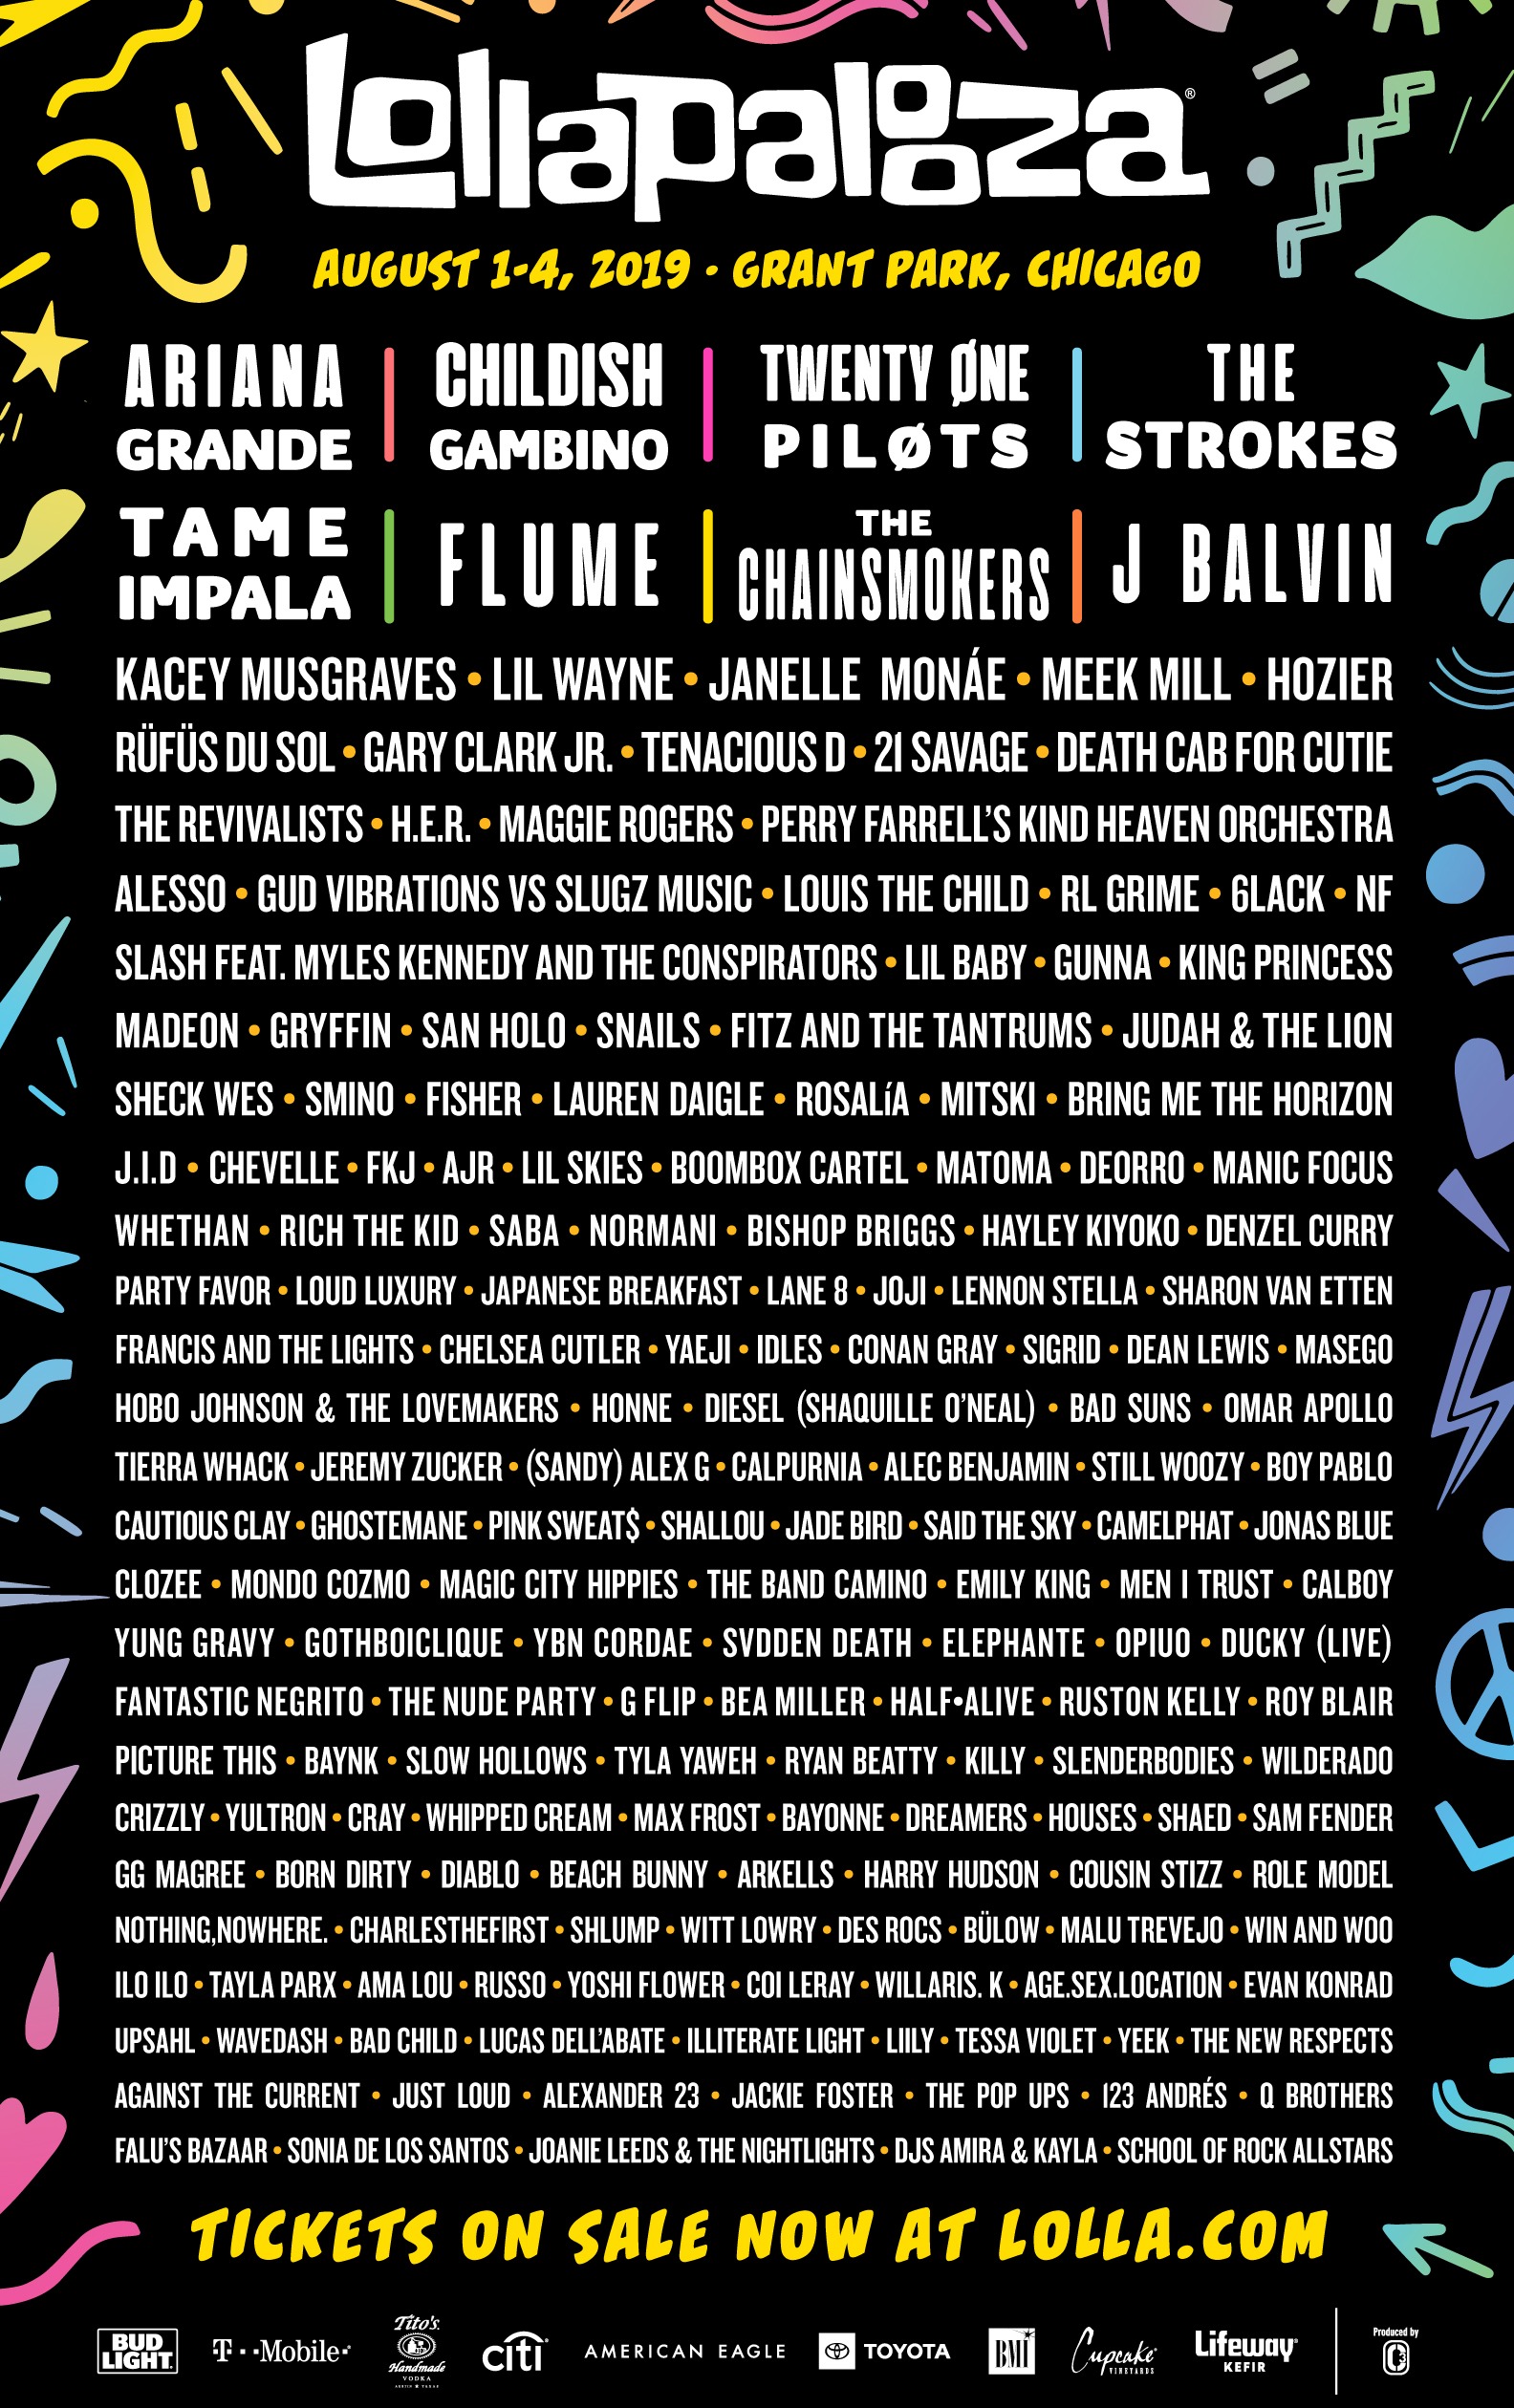 2020 Lollapalooza Chicago Festival Lolla Lineup, Tickets and Dates